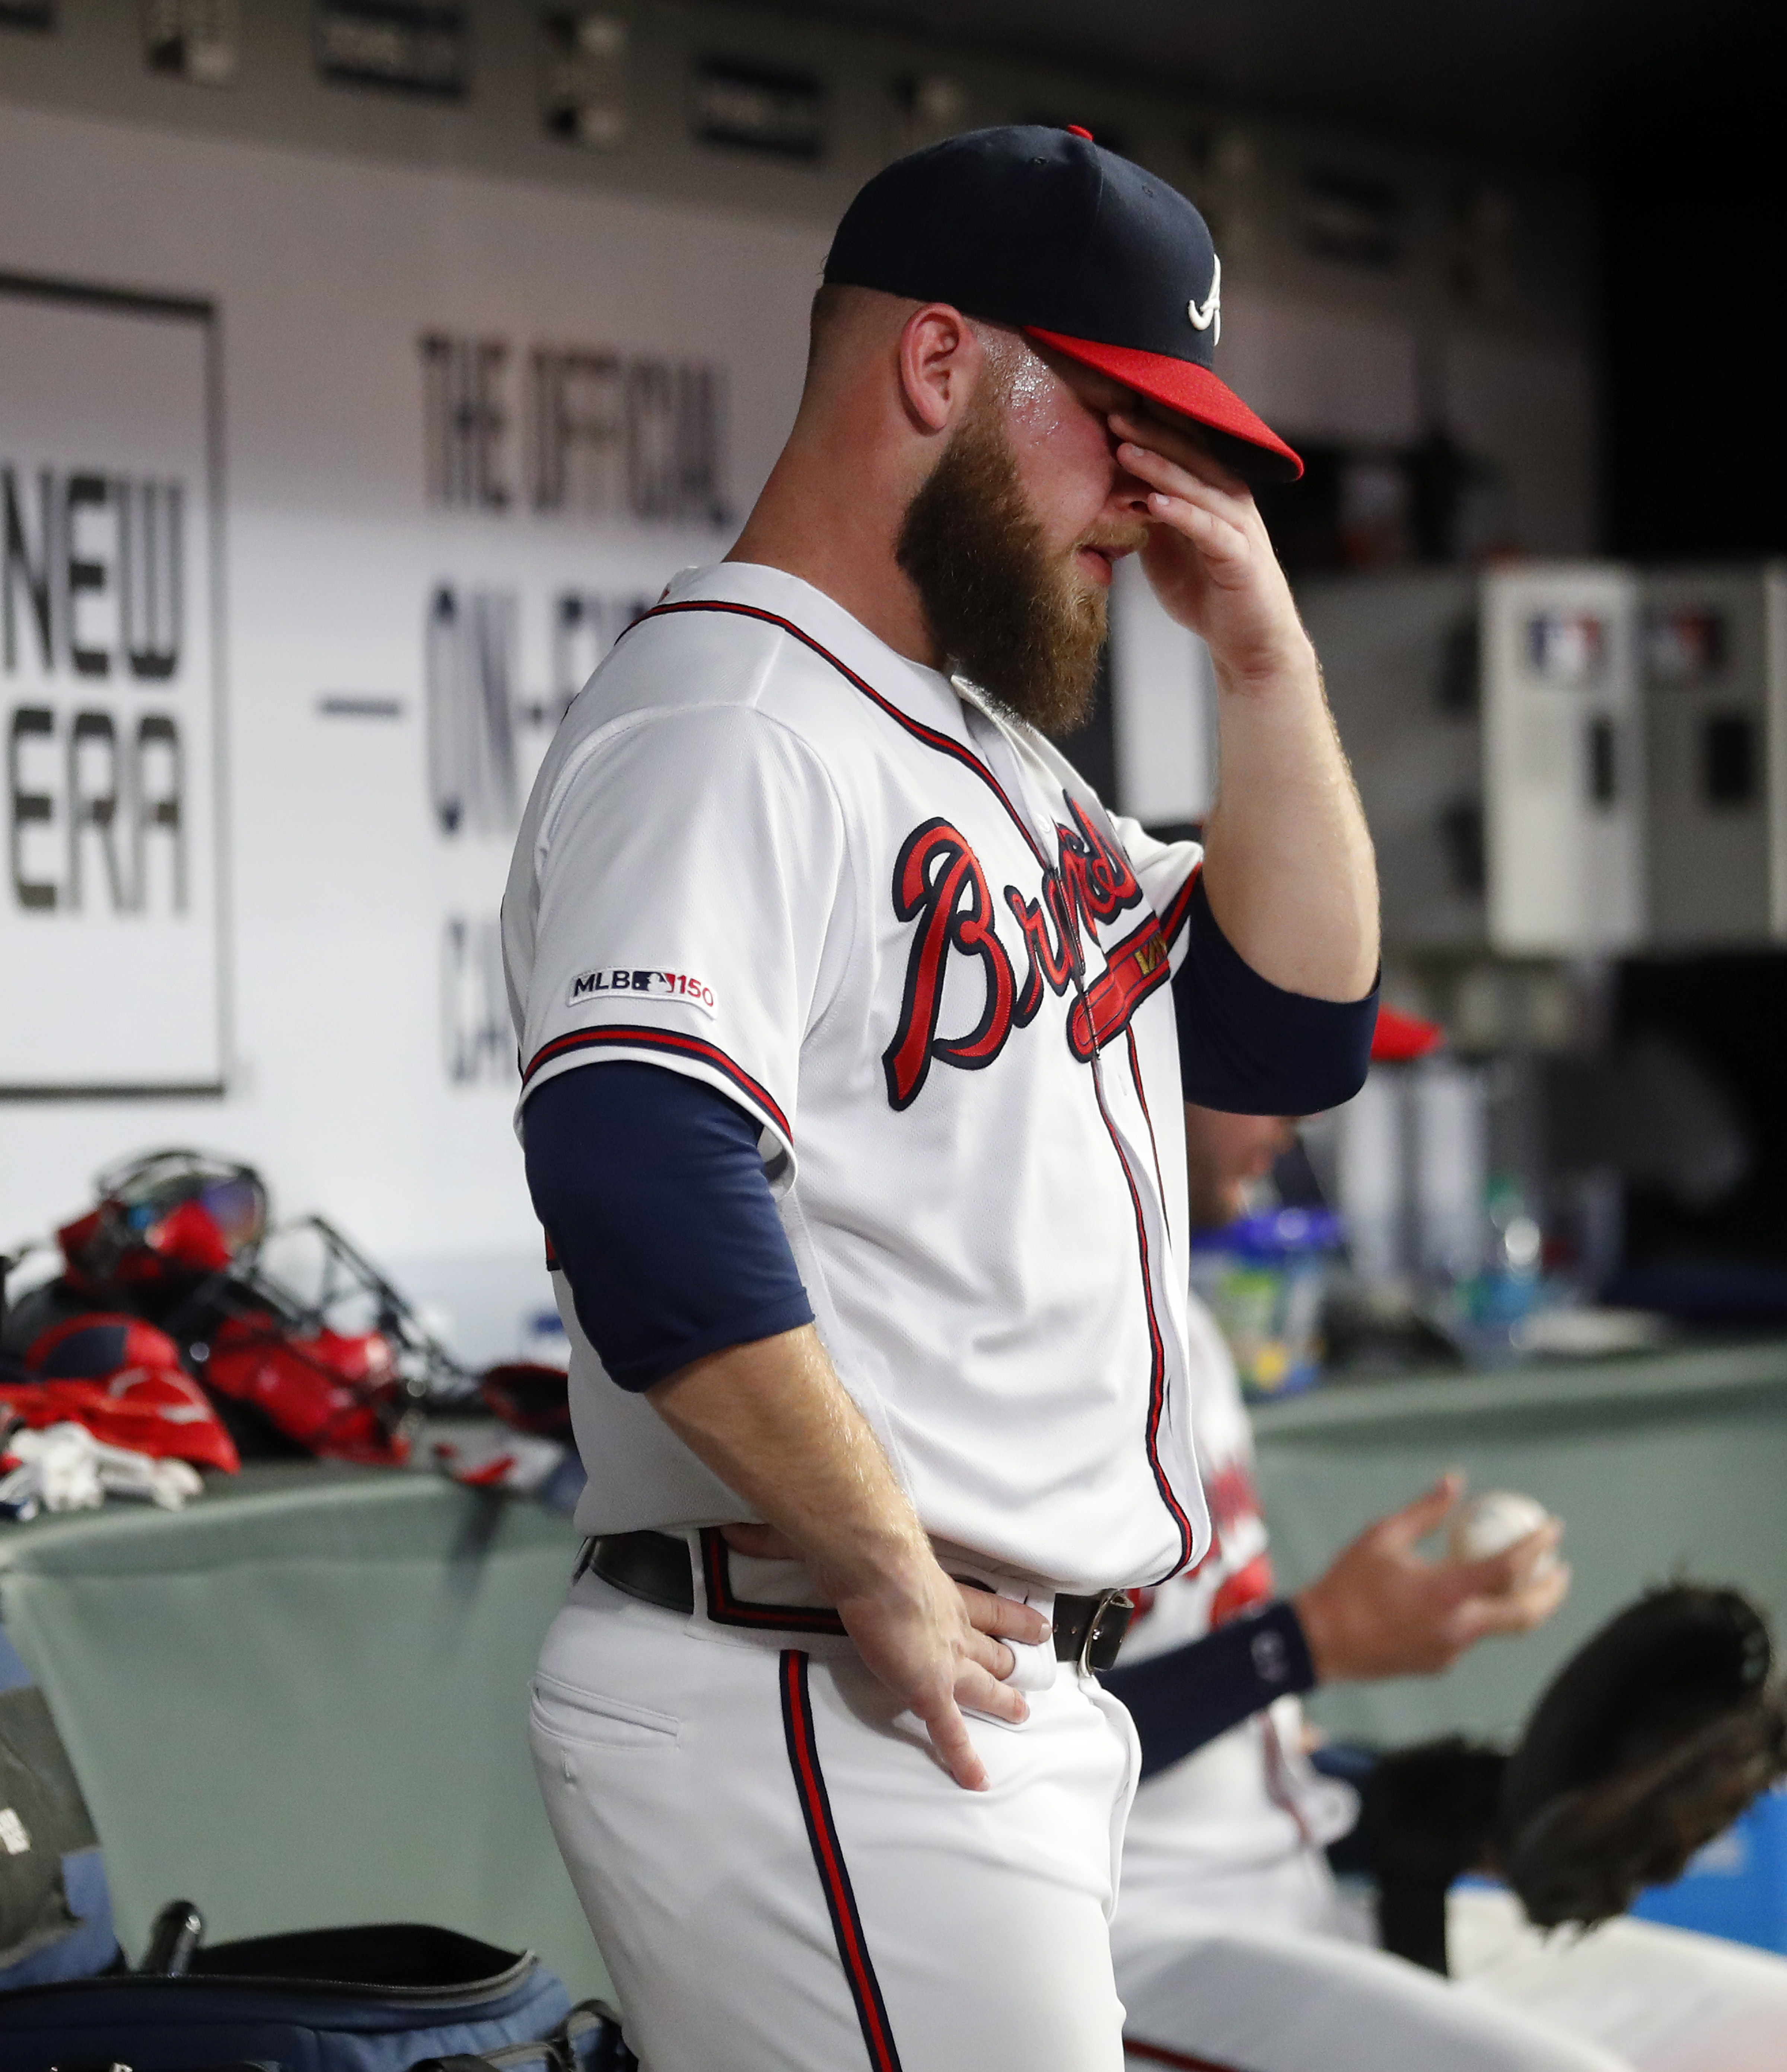 Braves activate reliever Venters, send Minter to minors